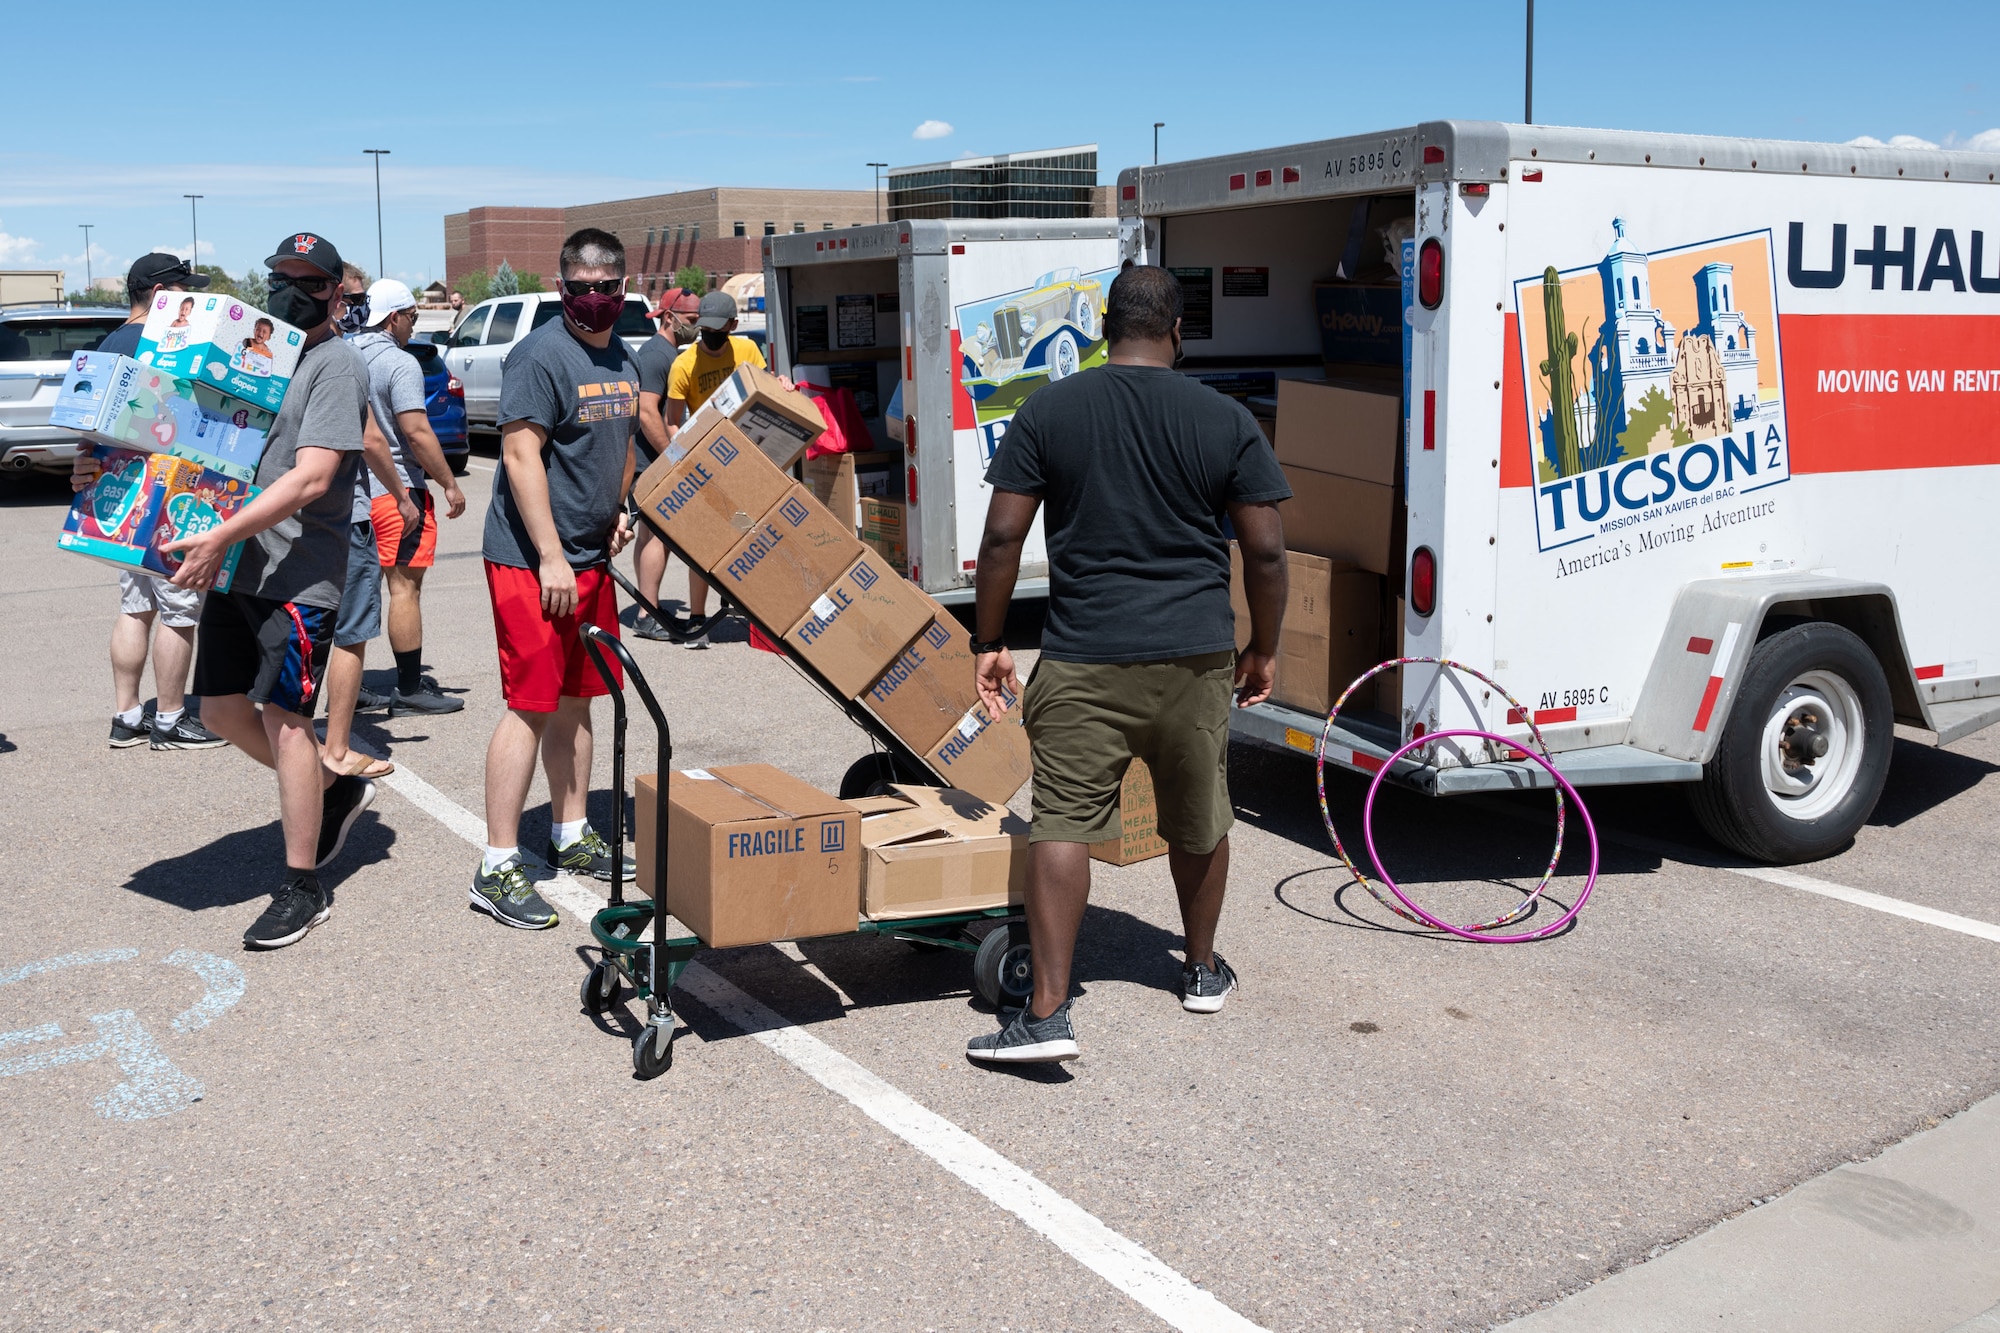 Volunteers unload boxes of donations from moving trailers Sept. 3, 2021 on Holloman Air Force Base, New Mexico. Volunteers from the Cannon AFB, N.M., community collected and delivered a donation valued at $80,000 in support of Operation Allies Welcome. The Department of Defense, through U.S. Northern Command, and in support of the Department of Homeland Security, is providing transportation, temporary housing, medical screening, and general support for up to 50,000 Afghan evacuees at suitable facilities, in permanent or temporary structures, as quickly as possible. This initiative provides Afghan personnel essential support at secure locations outside Afghanistan. (U.S. Air Force photo by Tech. Sgt. BreeAnn Sachs)